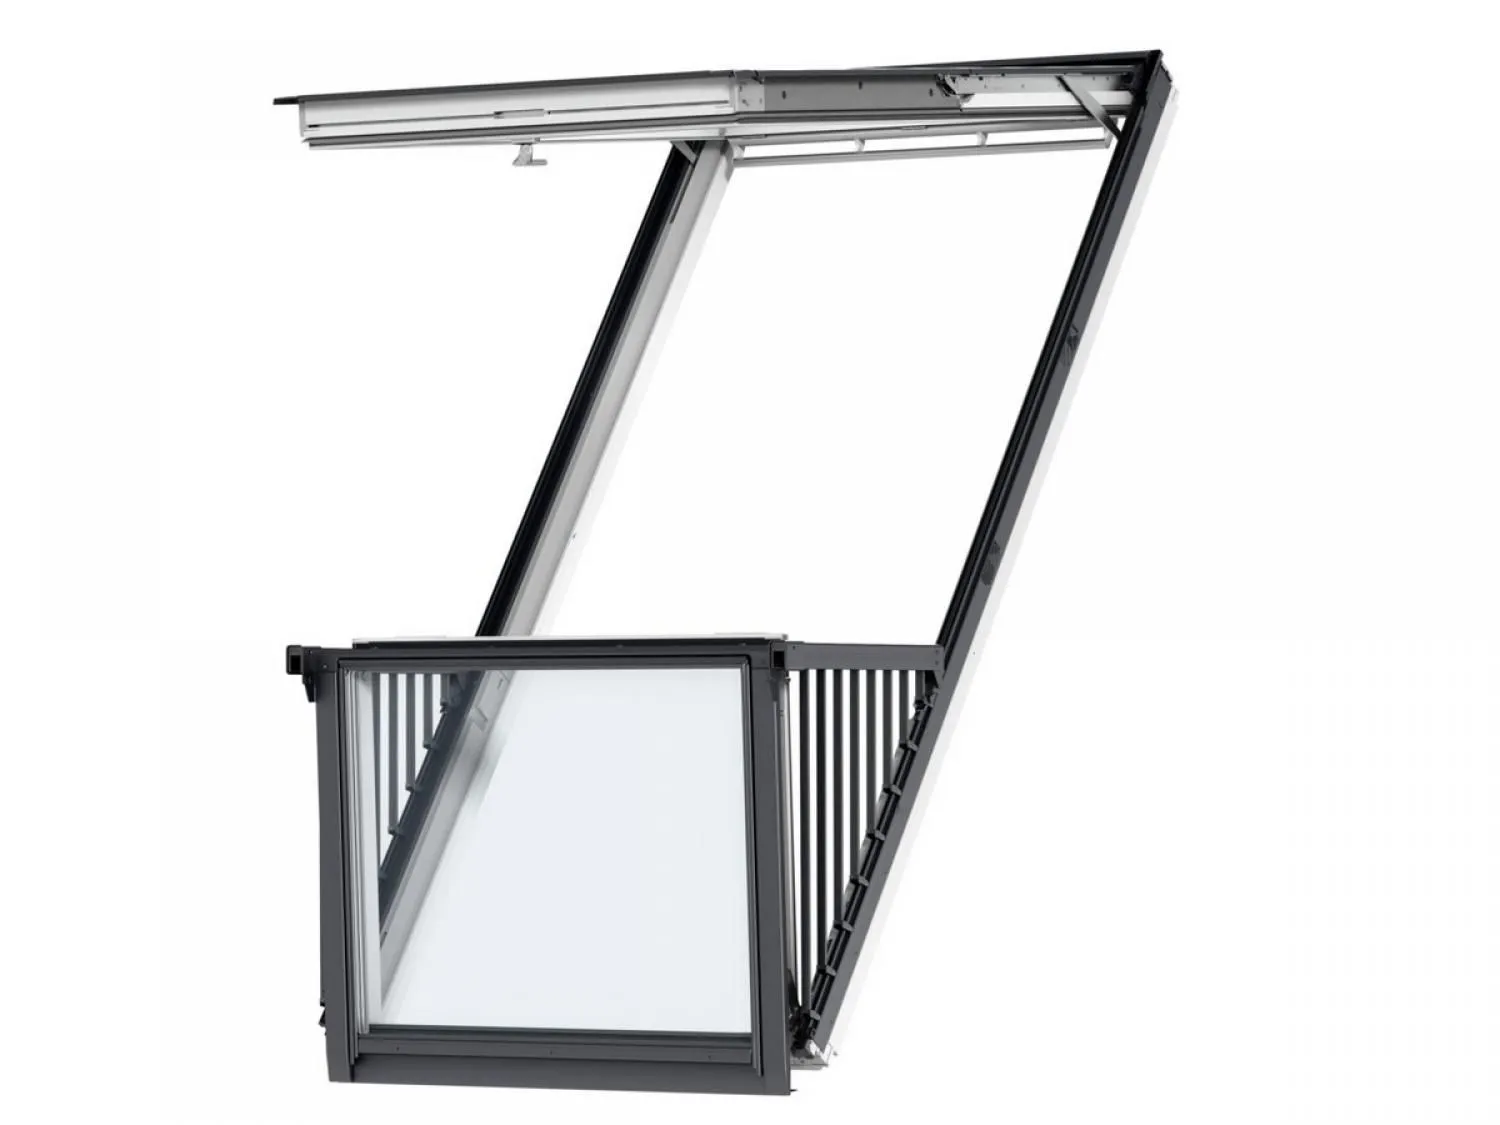 Velux Single CABRIO Balcony Roof Window  940 x 2520   White Painted   GDL PK19 SD0L001